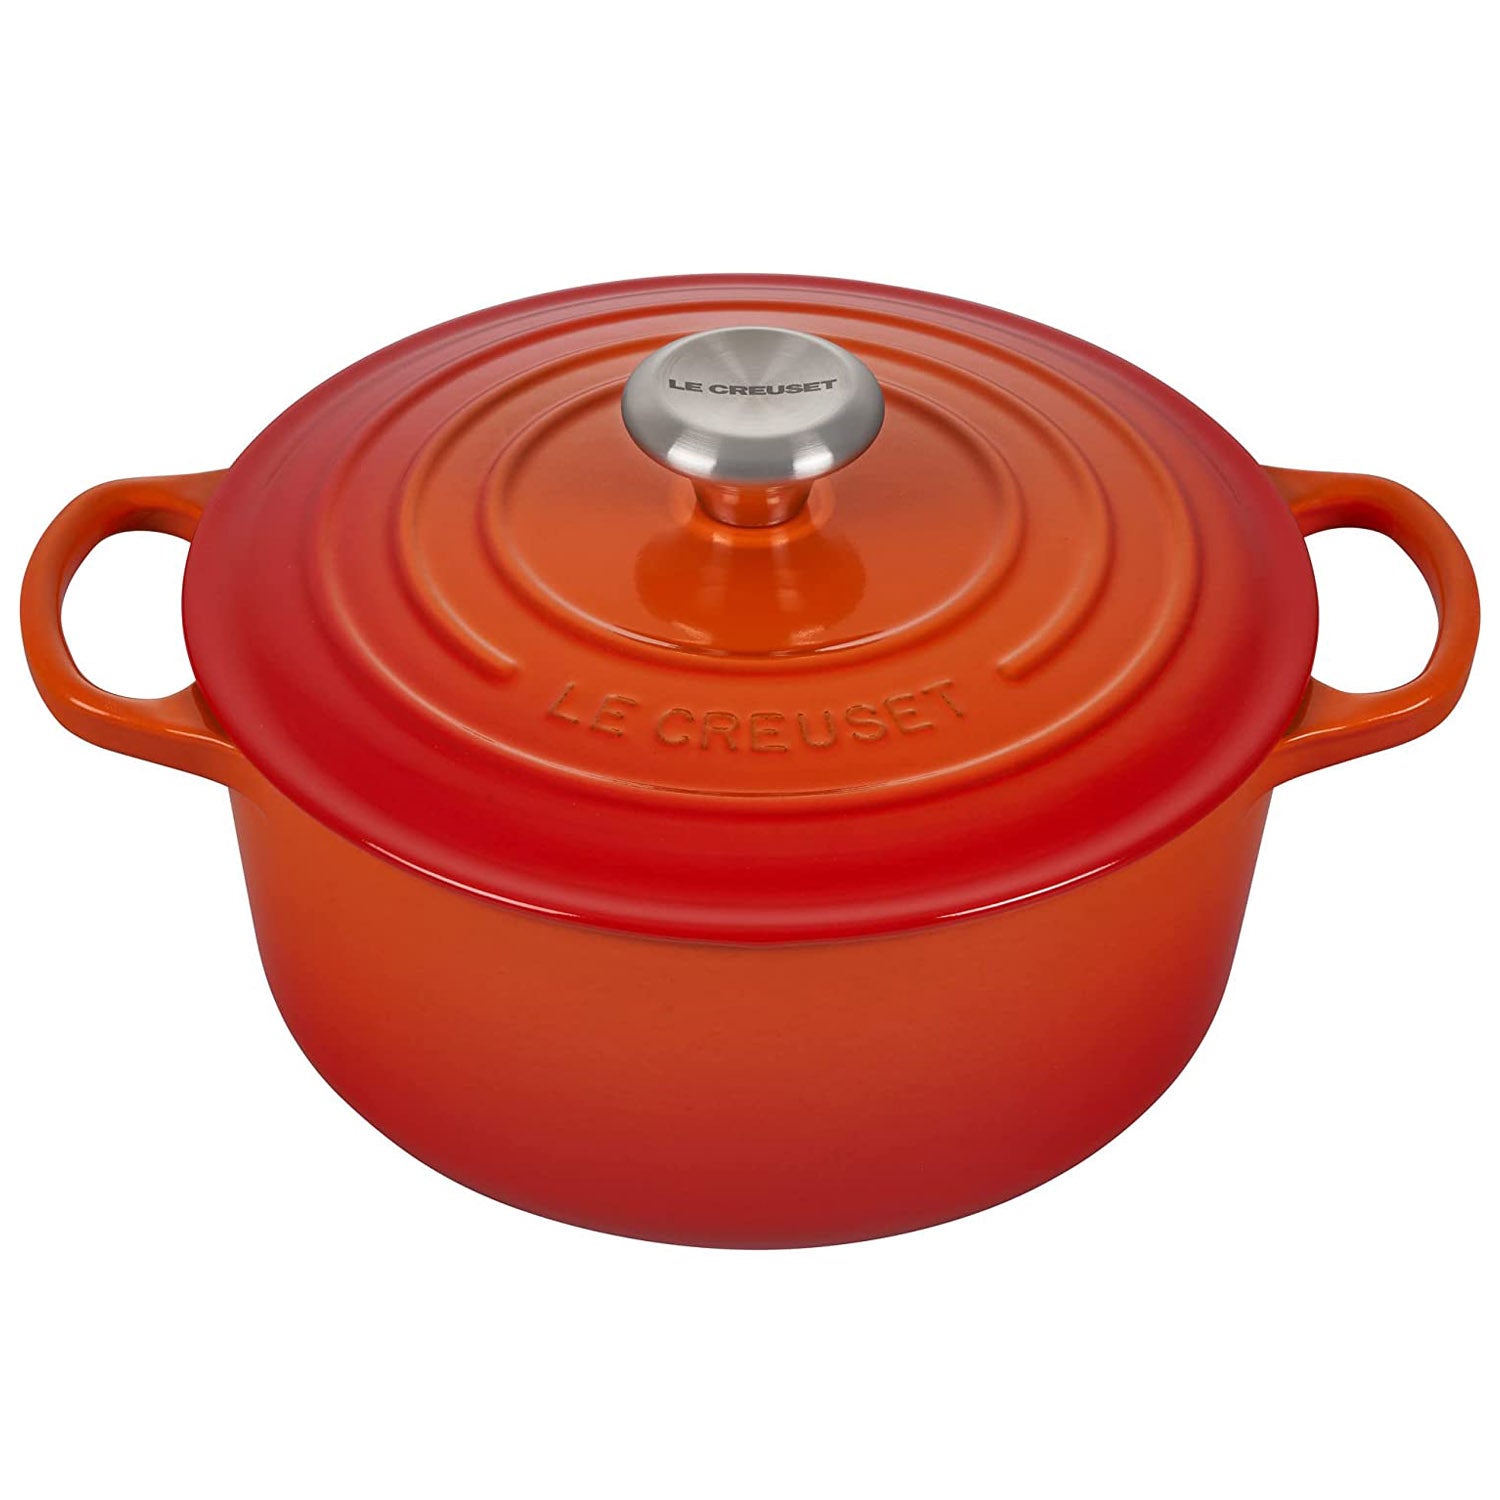 Le Creuset 10-Pc Cookware Set in Flame